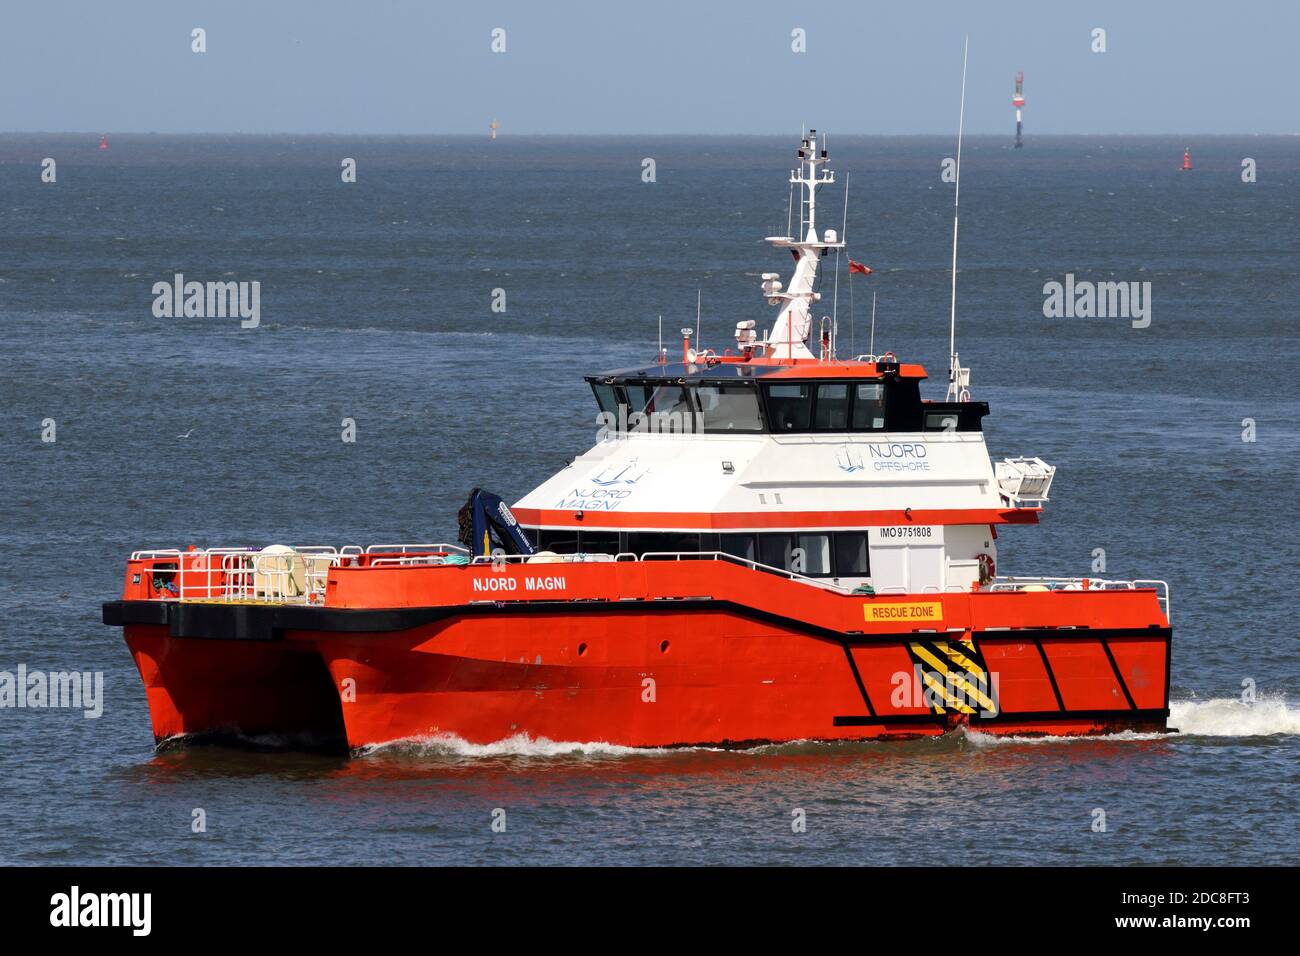 The offshore crew boat Njord Magni will reach the port of Cuxhaven on August 22, 2020. Stock Photo